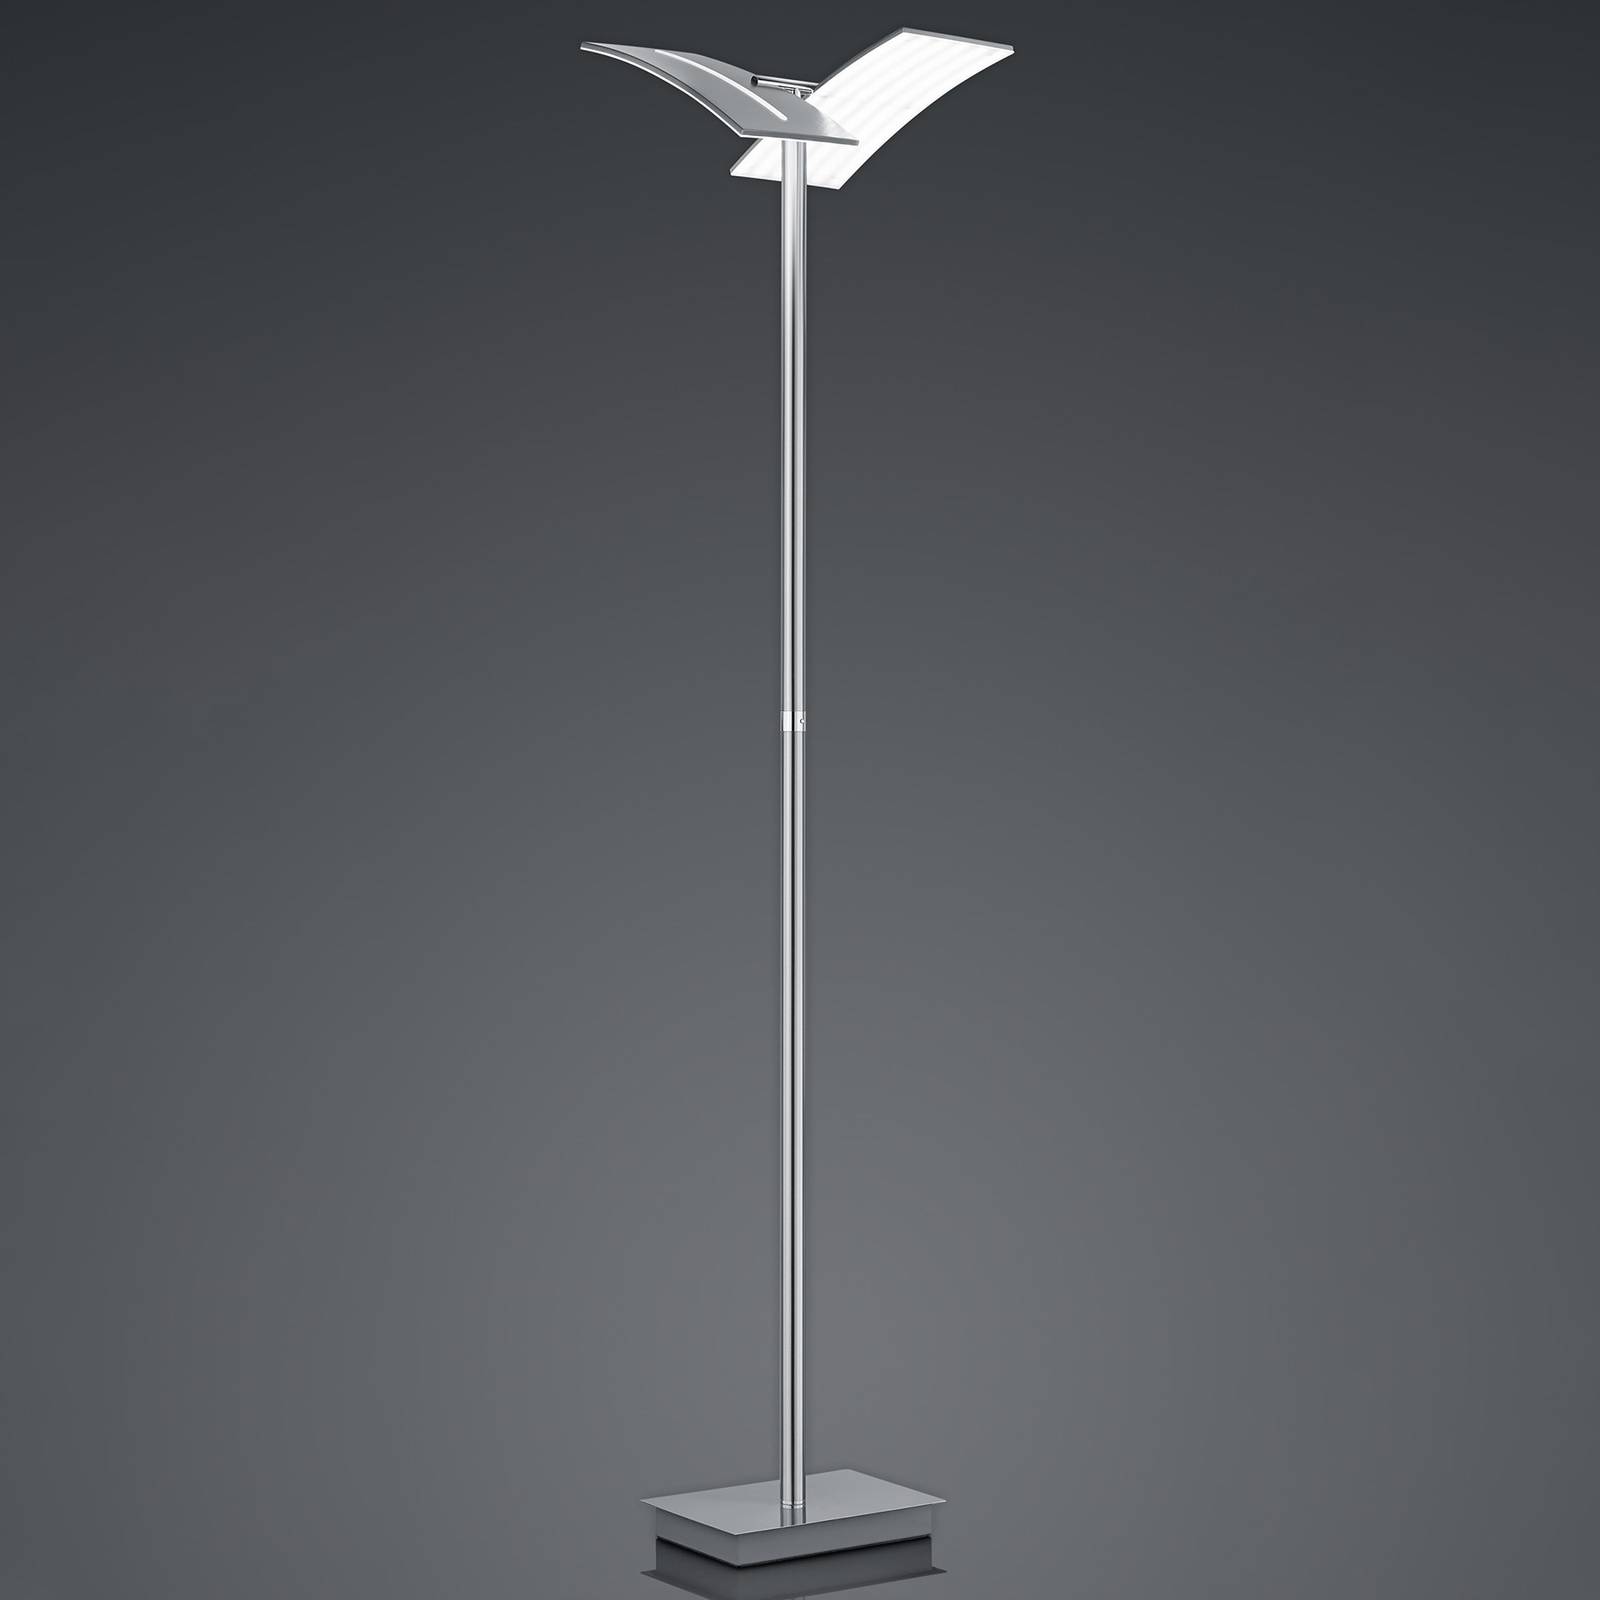 Image of HELL Luminaire de sol LED Dual CCT, intensité lumineuse variable, nickel 4045542224787